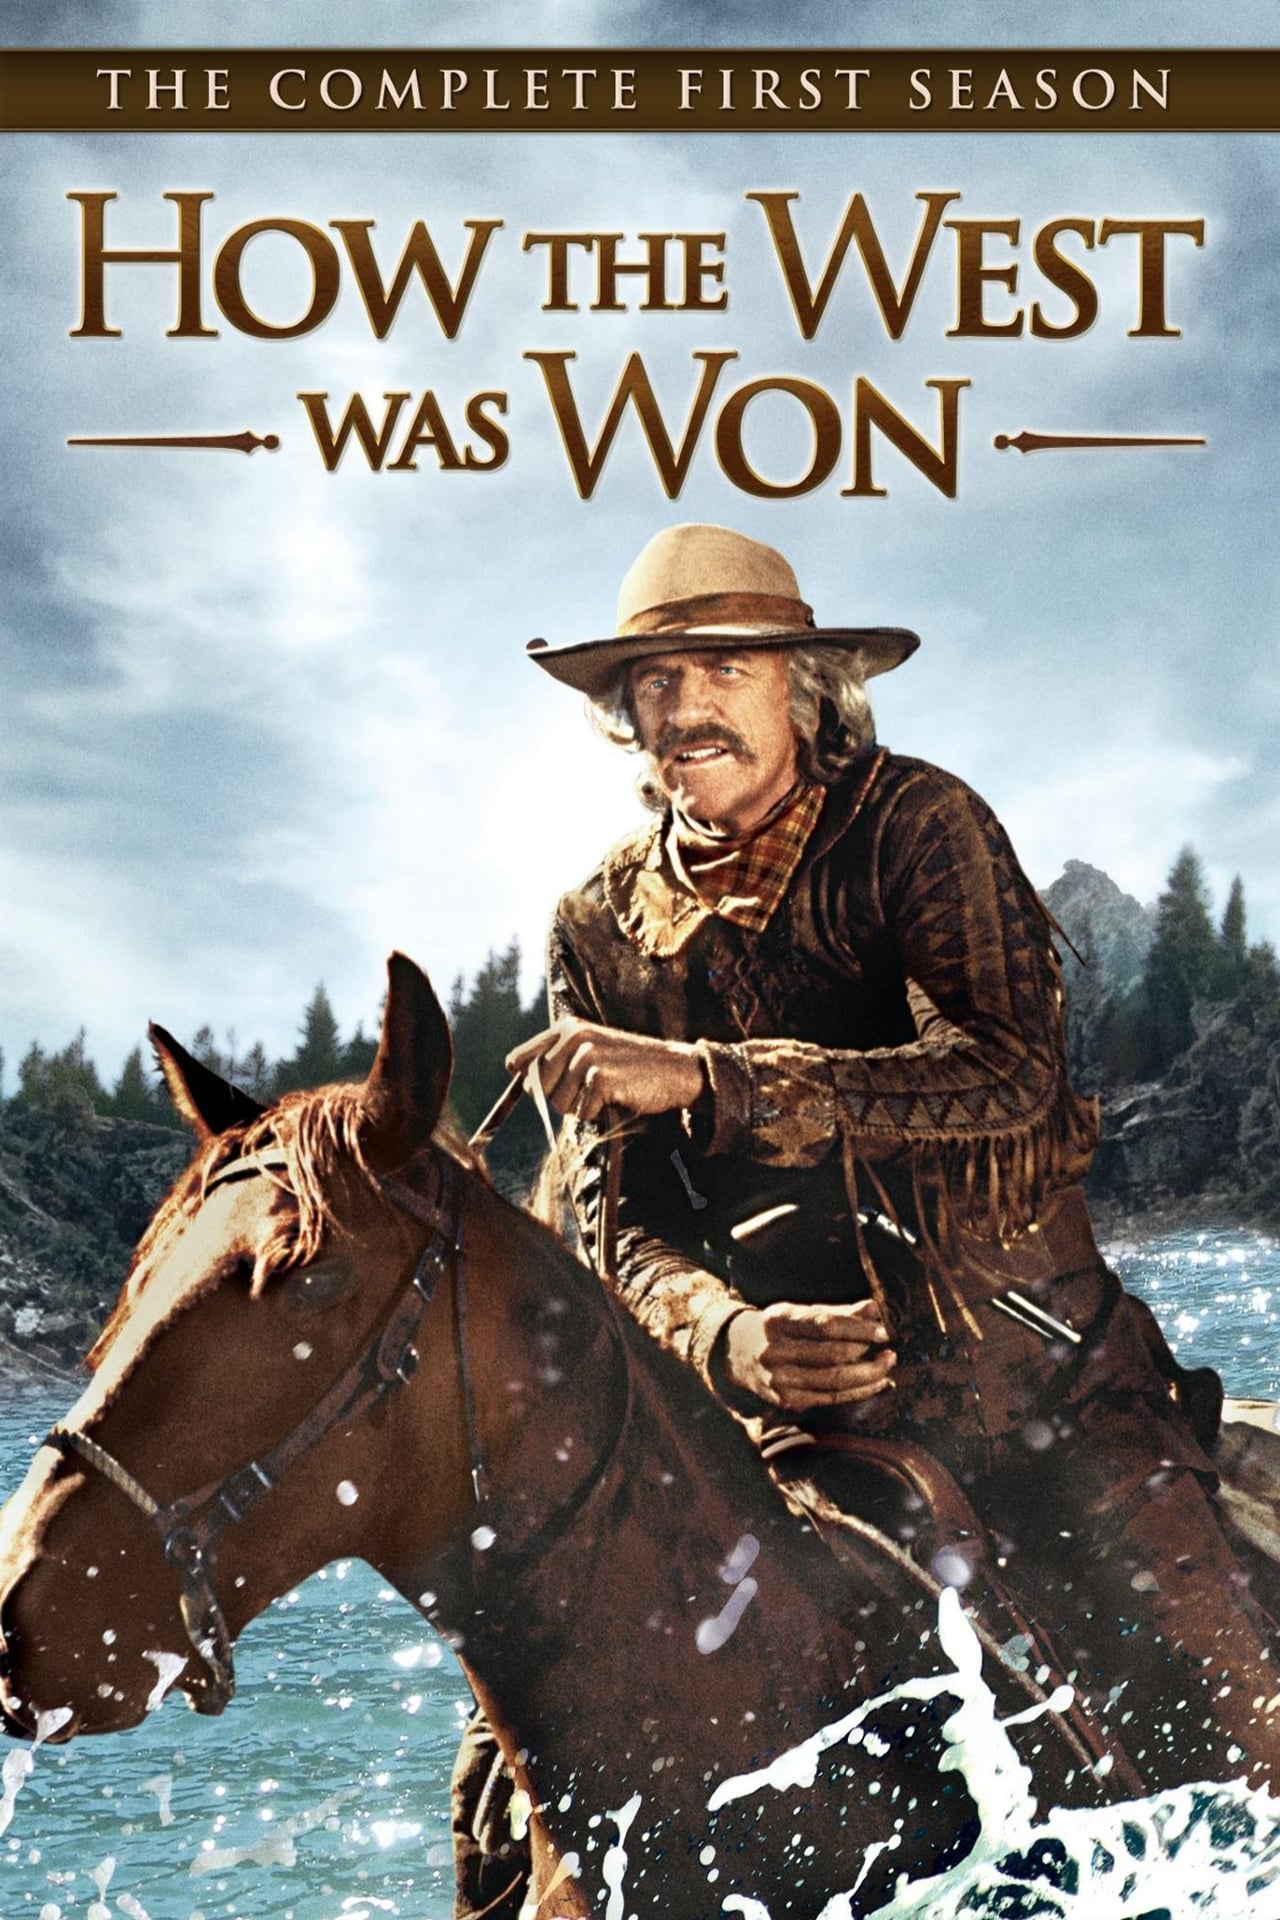 How The West Was Won (1976)